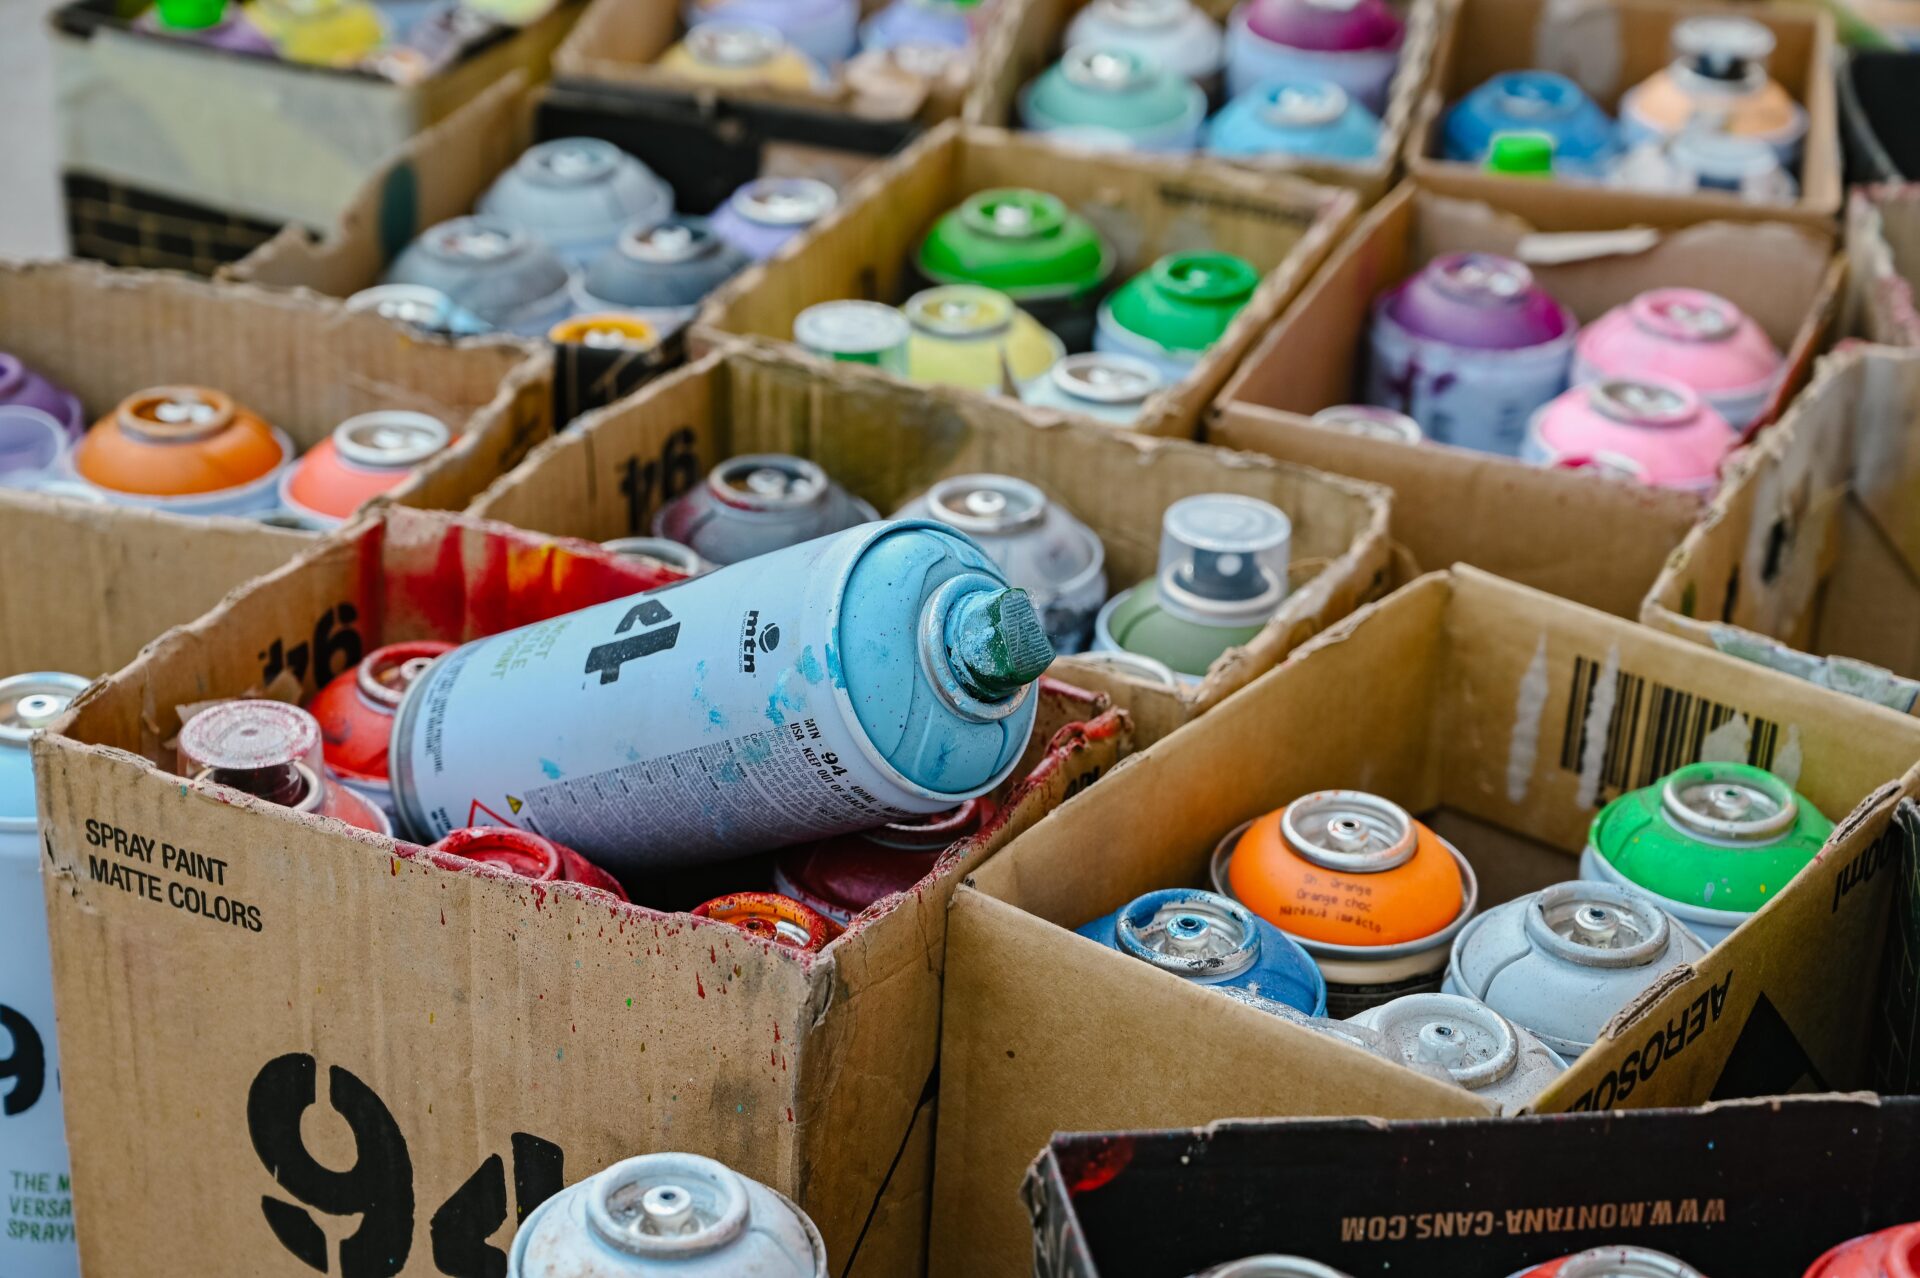 close up photo of many cans of used spray paint sitting in boxes